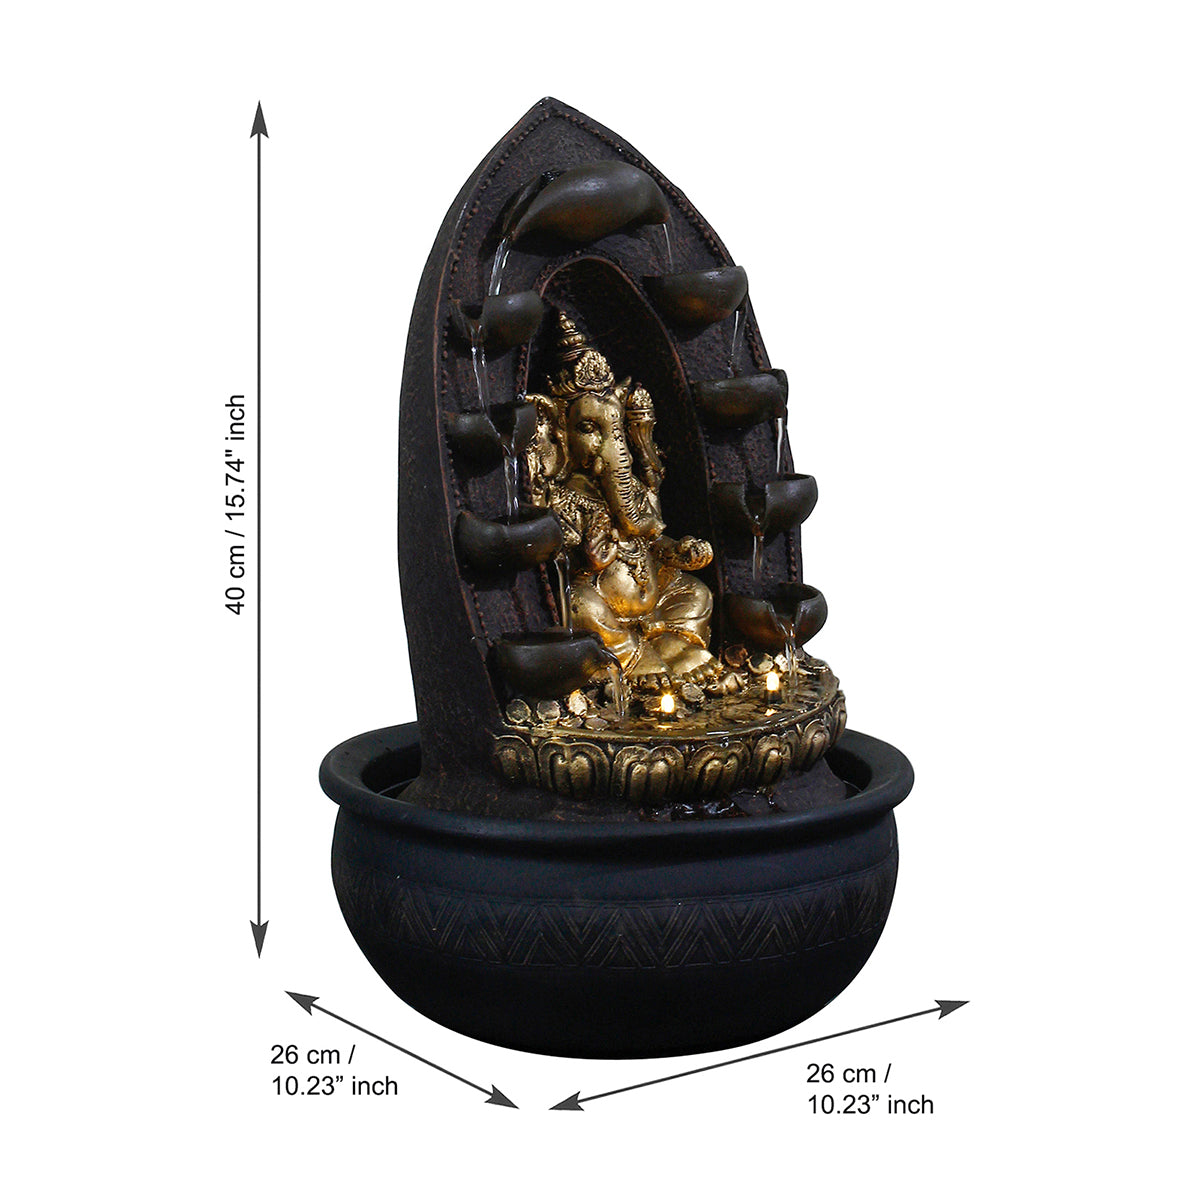 Polystone Black and Golden Decorative Lord Ganesha Statue Water Fountain With Light For Home/Office Décor 2